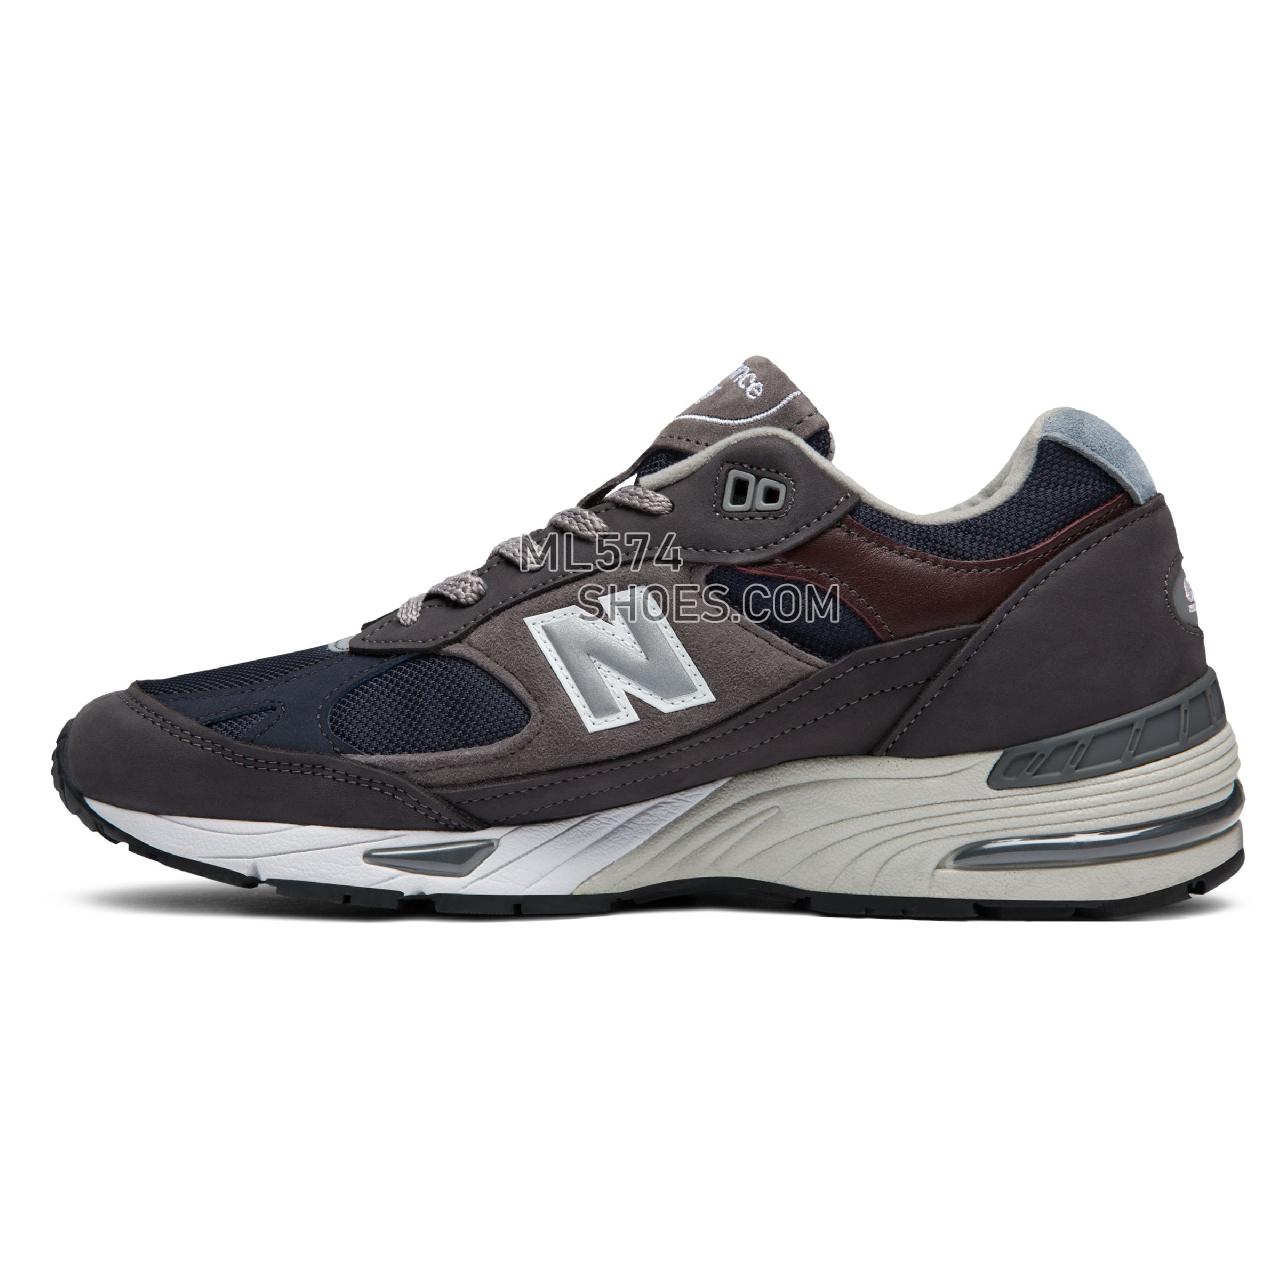 New Balance 991 Made in UK - Men's 991 - Classic Dark Shadow with Pewter - M991GNN